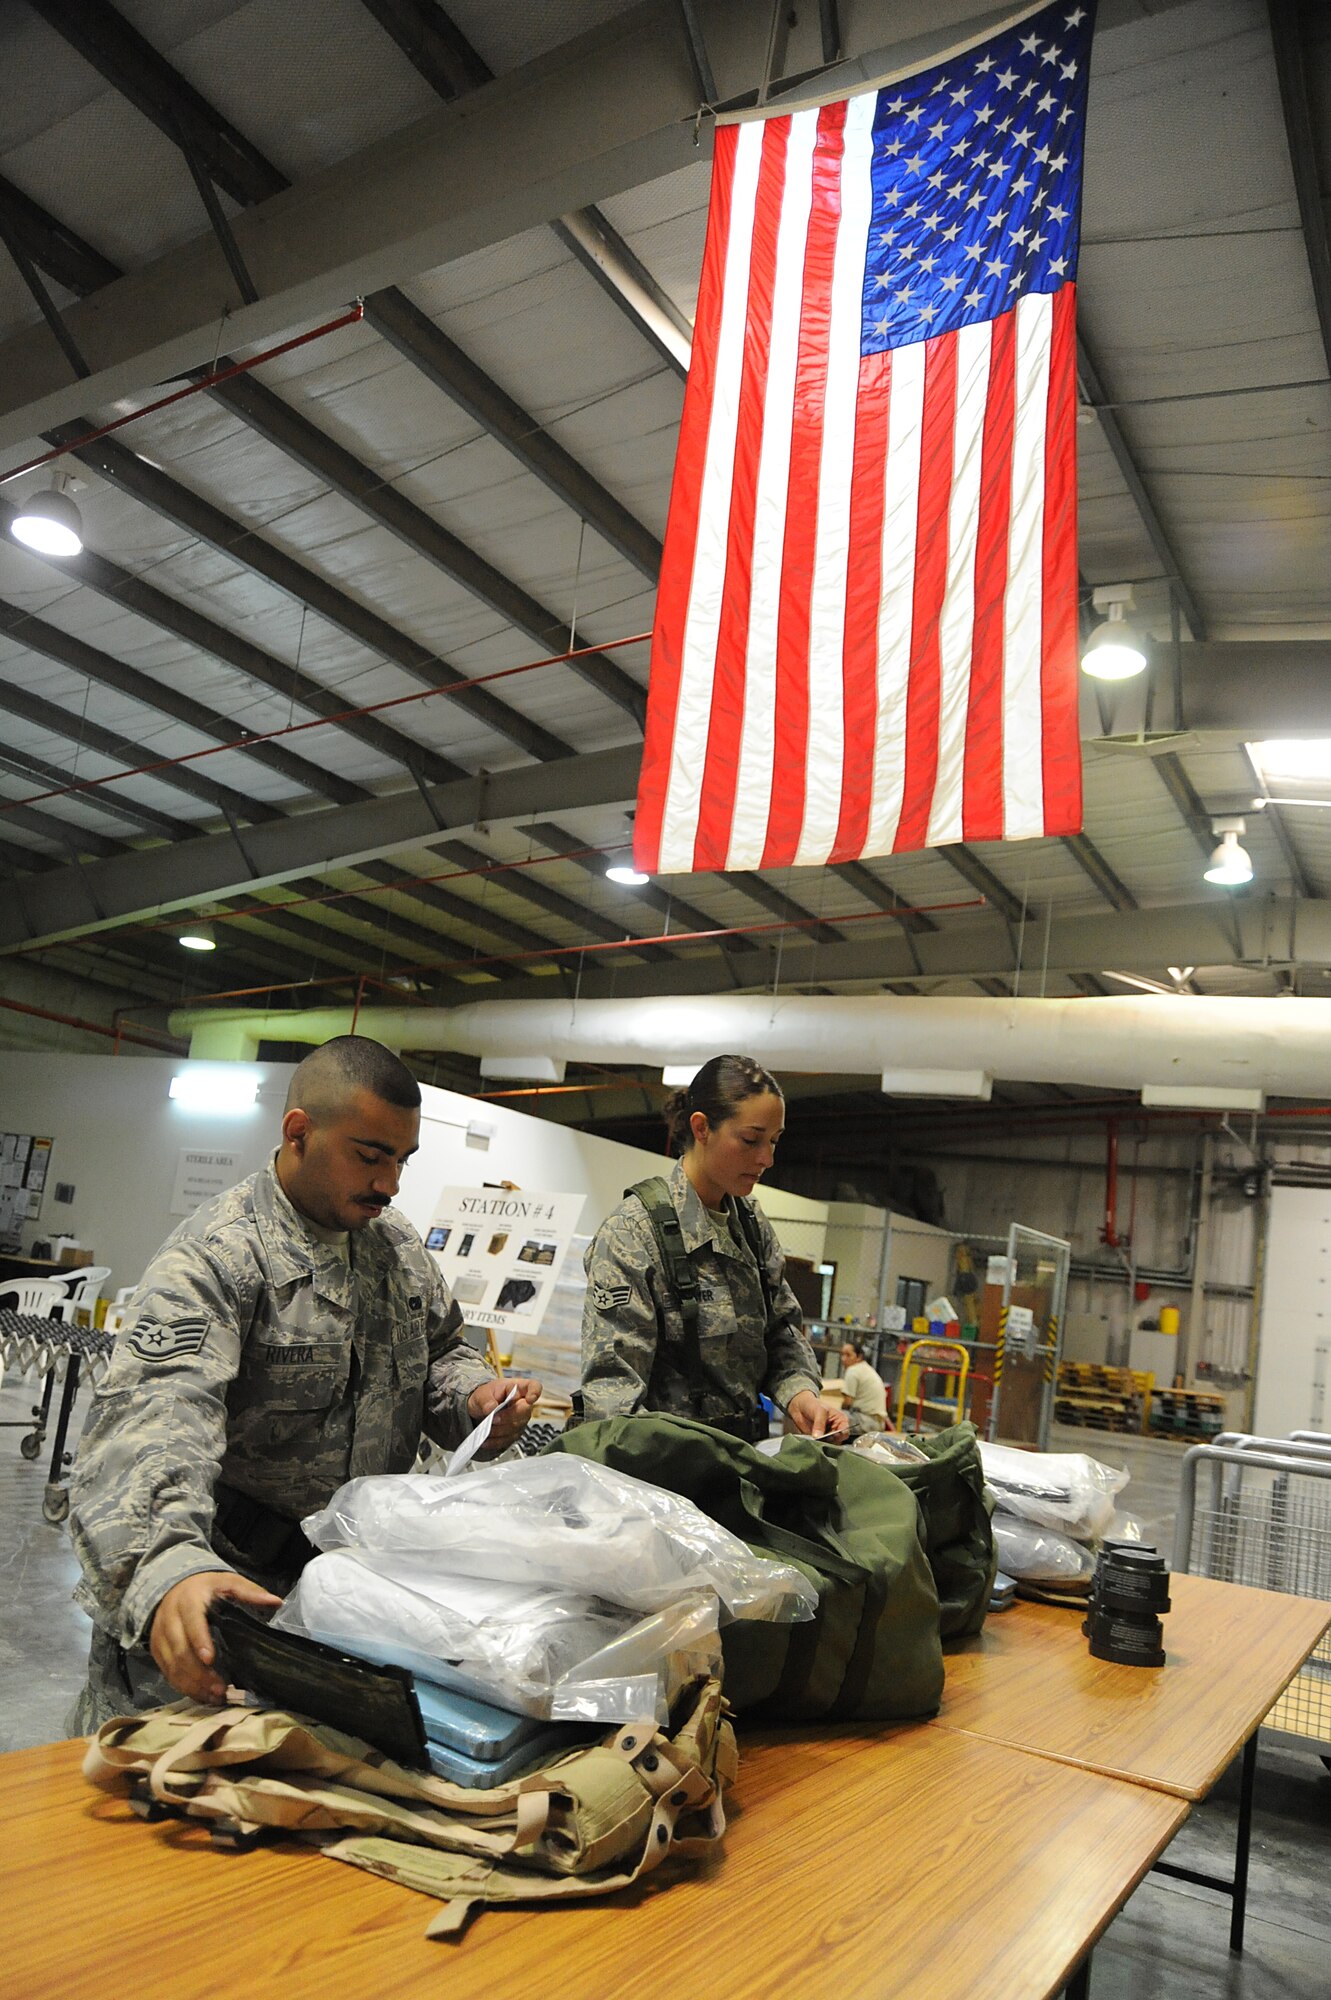 Staff Sgt. Israel Rivera and Senior Airman Rochelle Boyer, 380th Expeditionary Logistics Readiness Squadron, inventory their C-bags in a deployment processing line during a readiness exercise, April 21 at undisclosed location in Southwest Asia. The 380th ELRS ran the exercise to test the timeliness and capability for redeployment of Airmen. Sergeant Rivera is deployed from RAF Lakenheath, England and hails from Bronx, N.Y. Airman Boyer is deployed from Spagdahlem Air Base, Germany and hails from Reno, Nev. (U.S. Air Force photo by Senior Airman Brian J. Ellis) (Released)